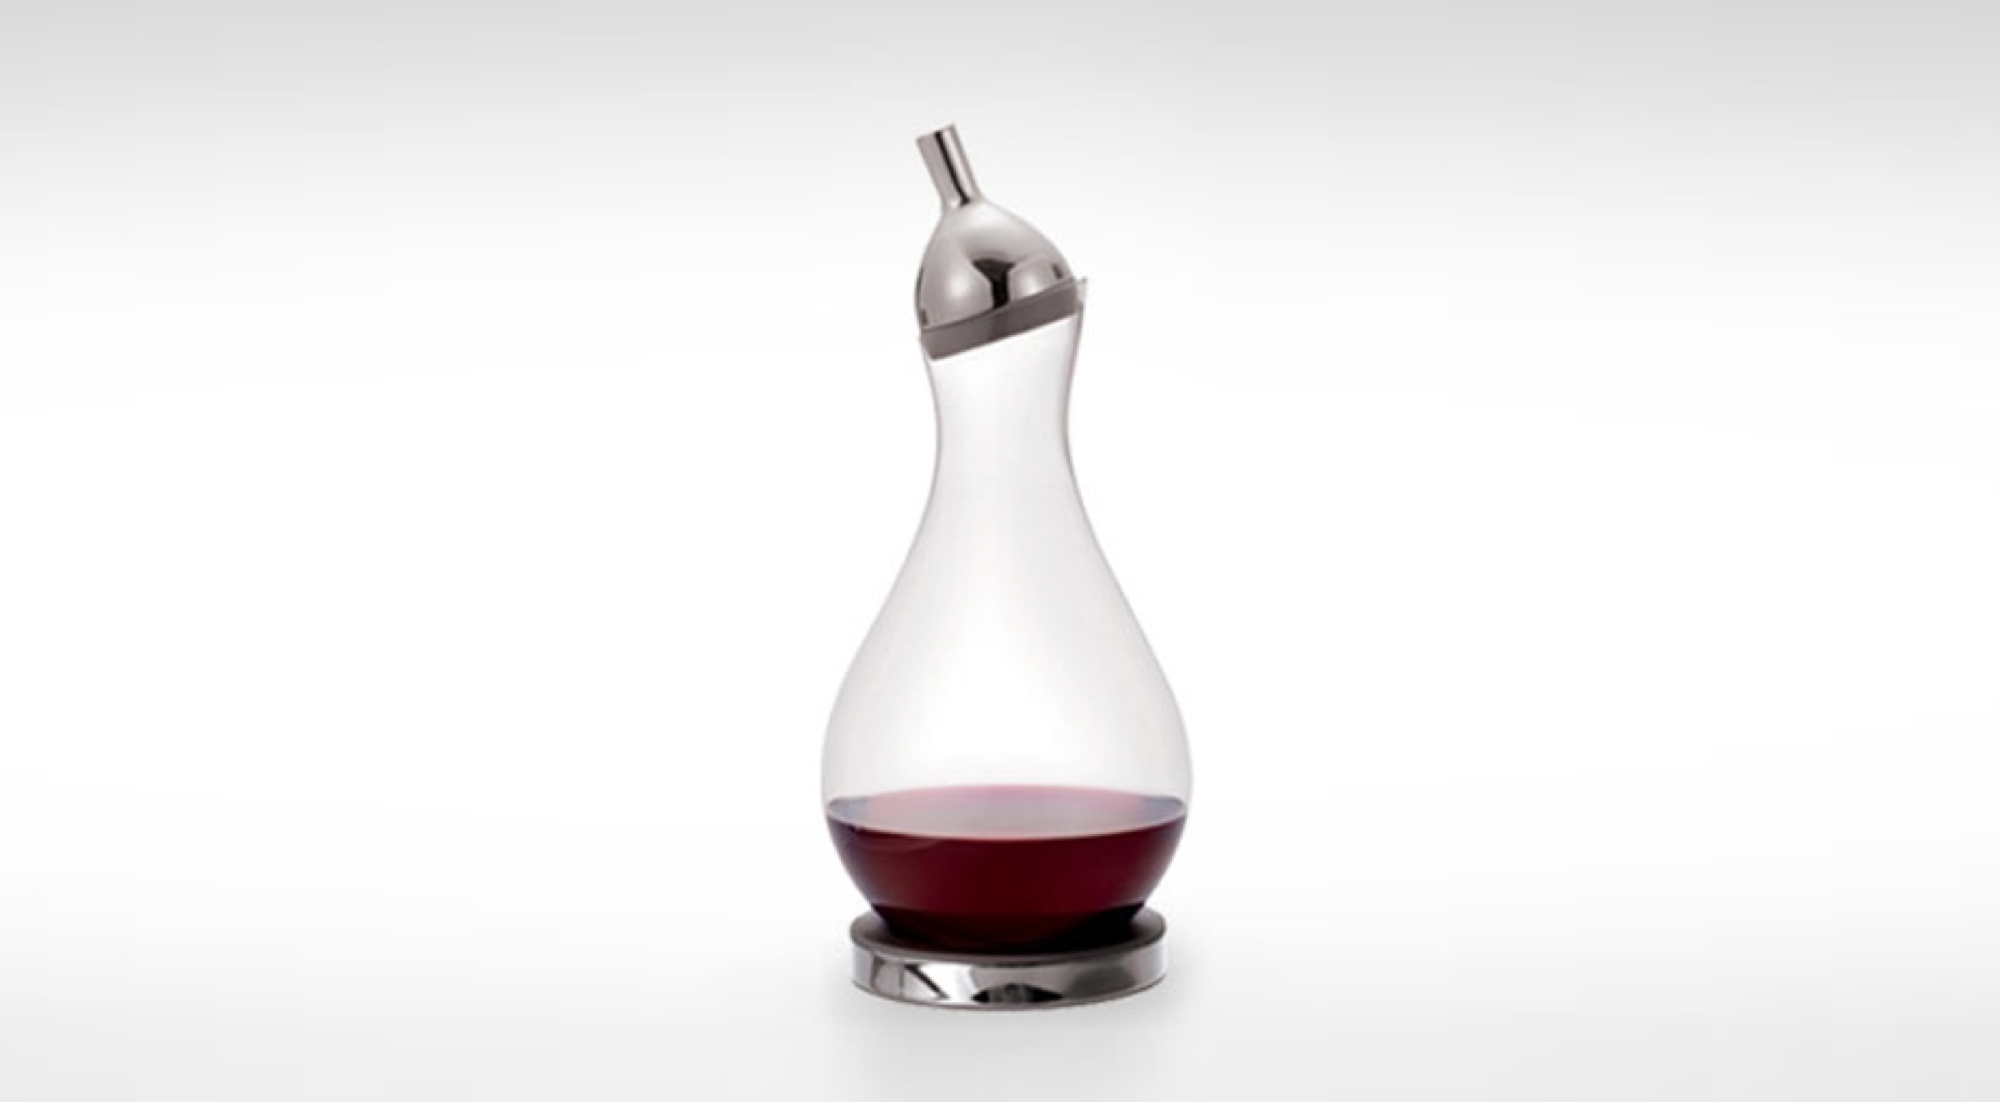 DesignApplause | Hulu red wine decanter. Yung-ho chang.